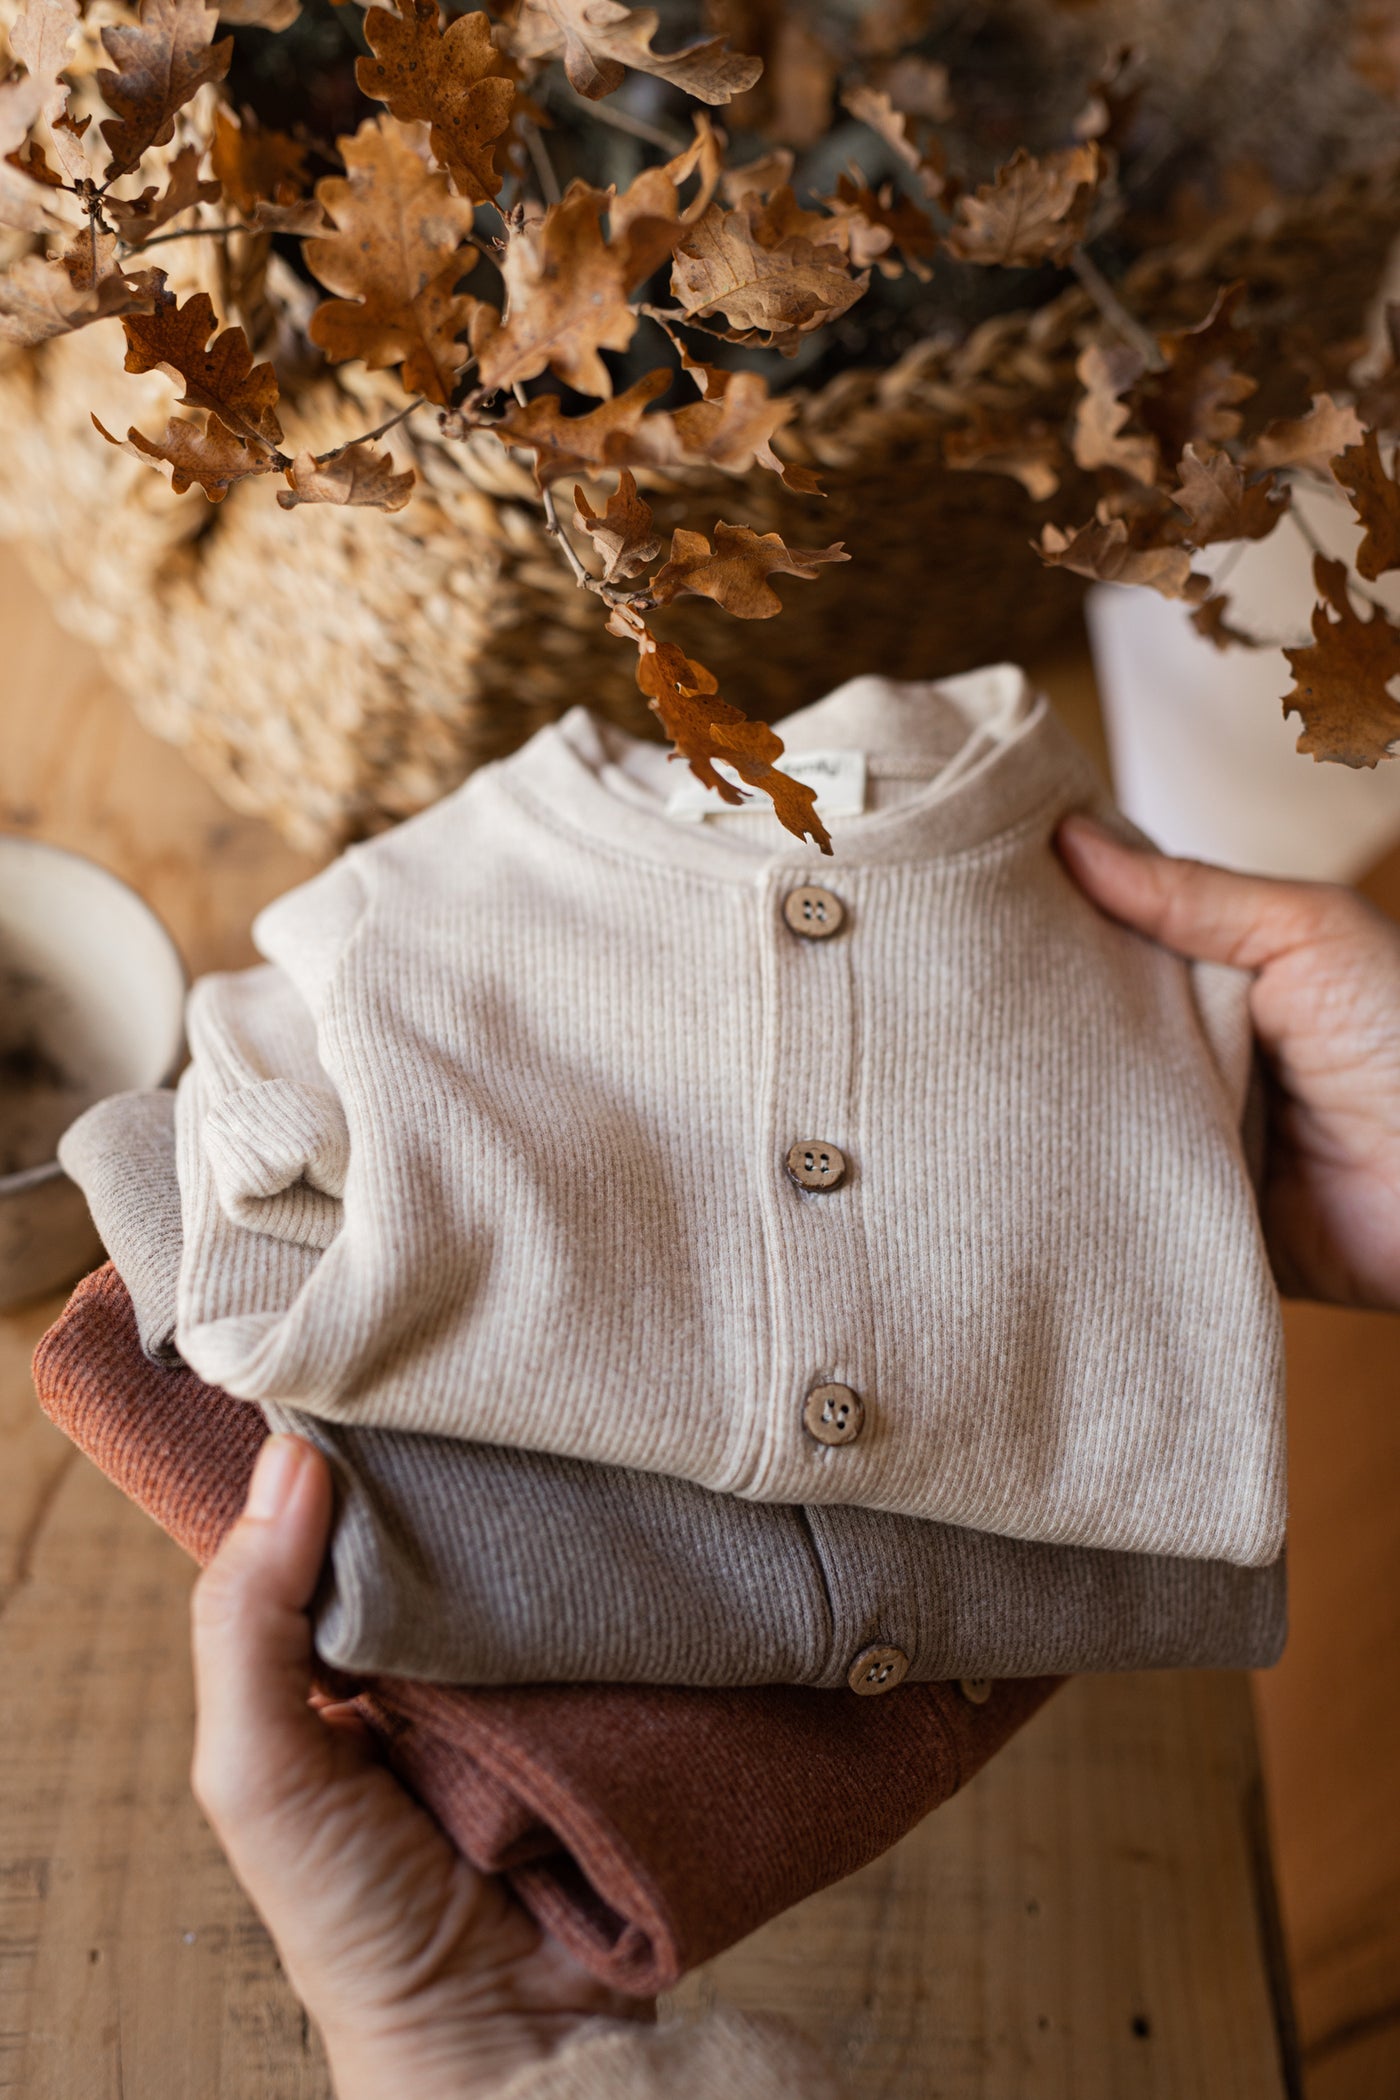 【1＋in the family】【40%OFF】MILAN taupe 長袖ロンパース 6m,9m,12m  | Coucoubebe/ククベベ